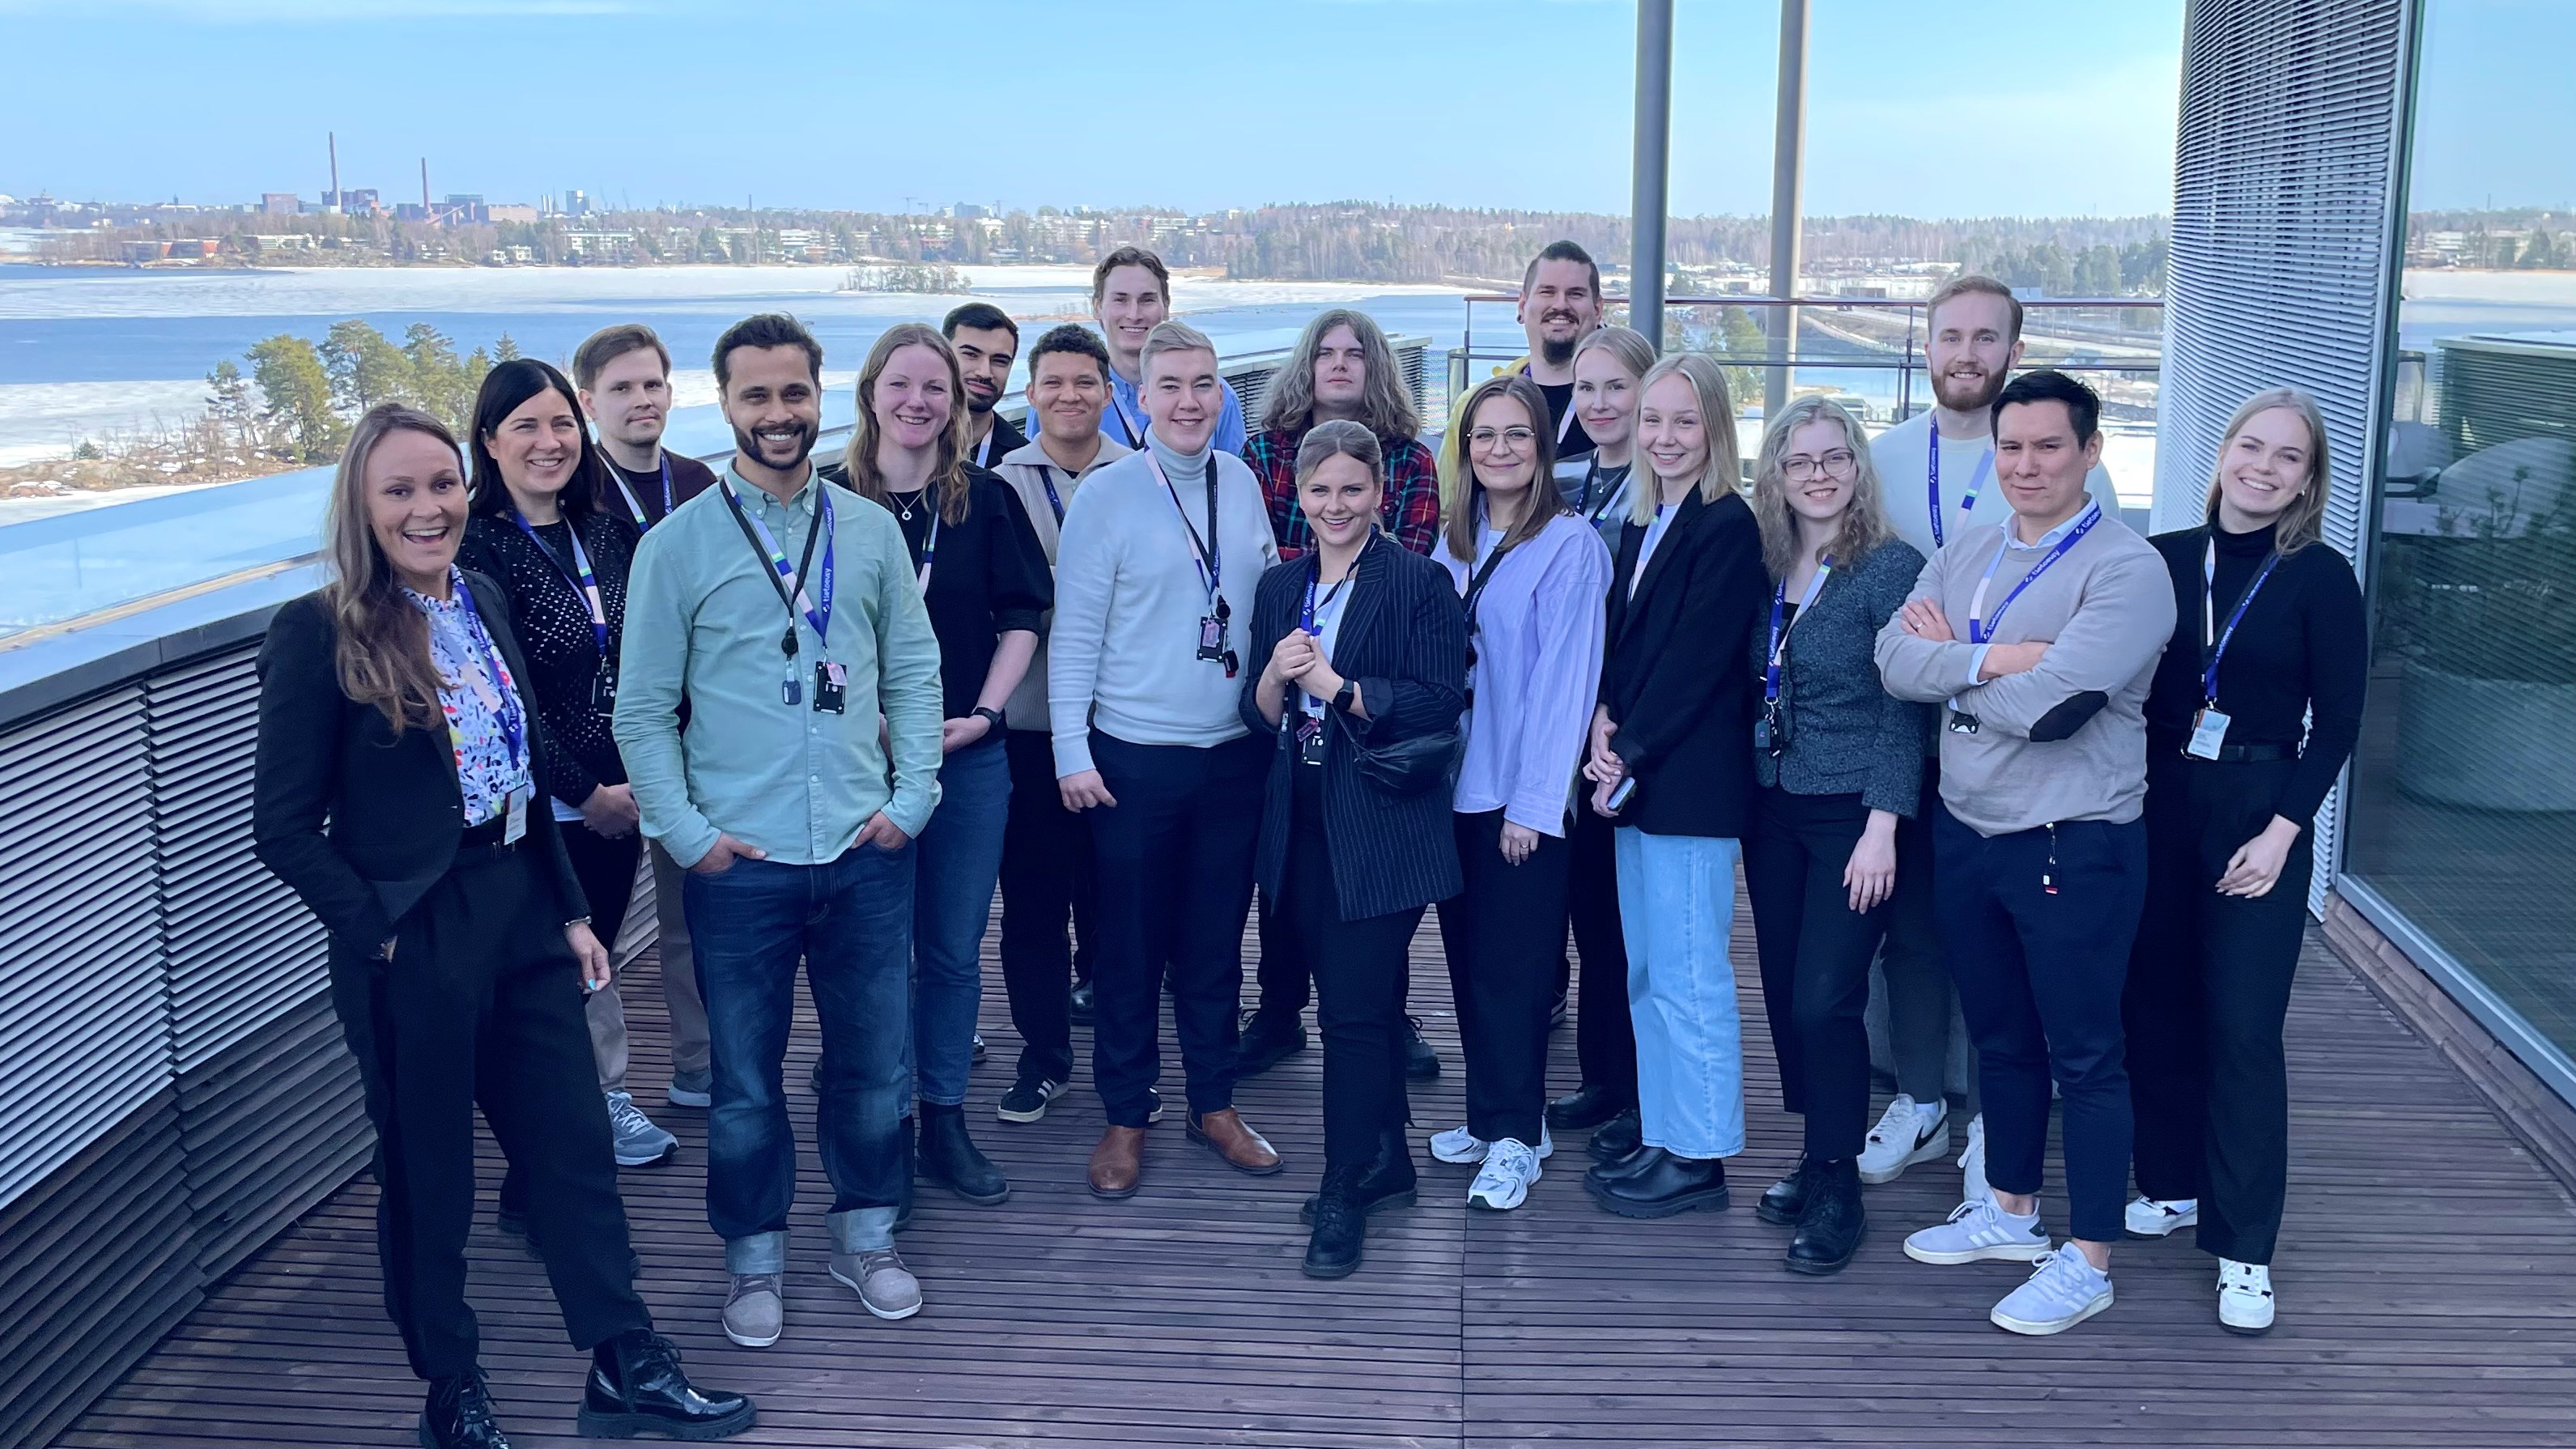 A new wave of junior talent joins Tietoevry Tech Services in Finland